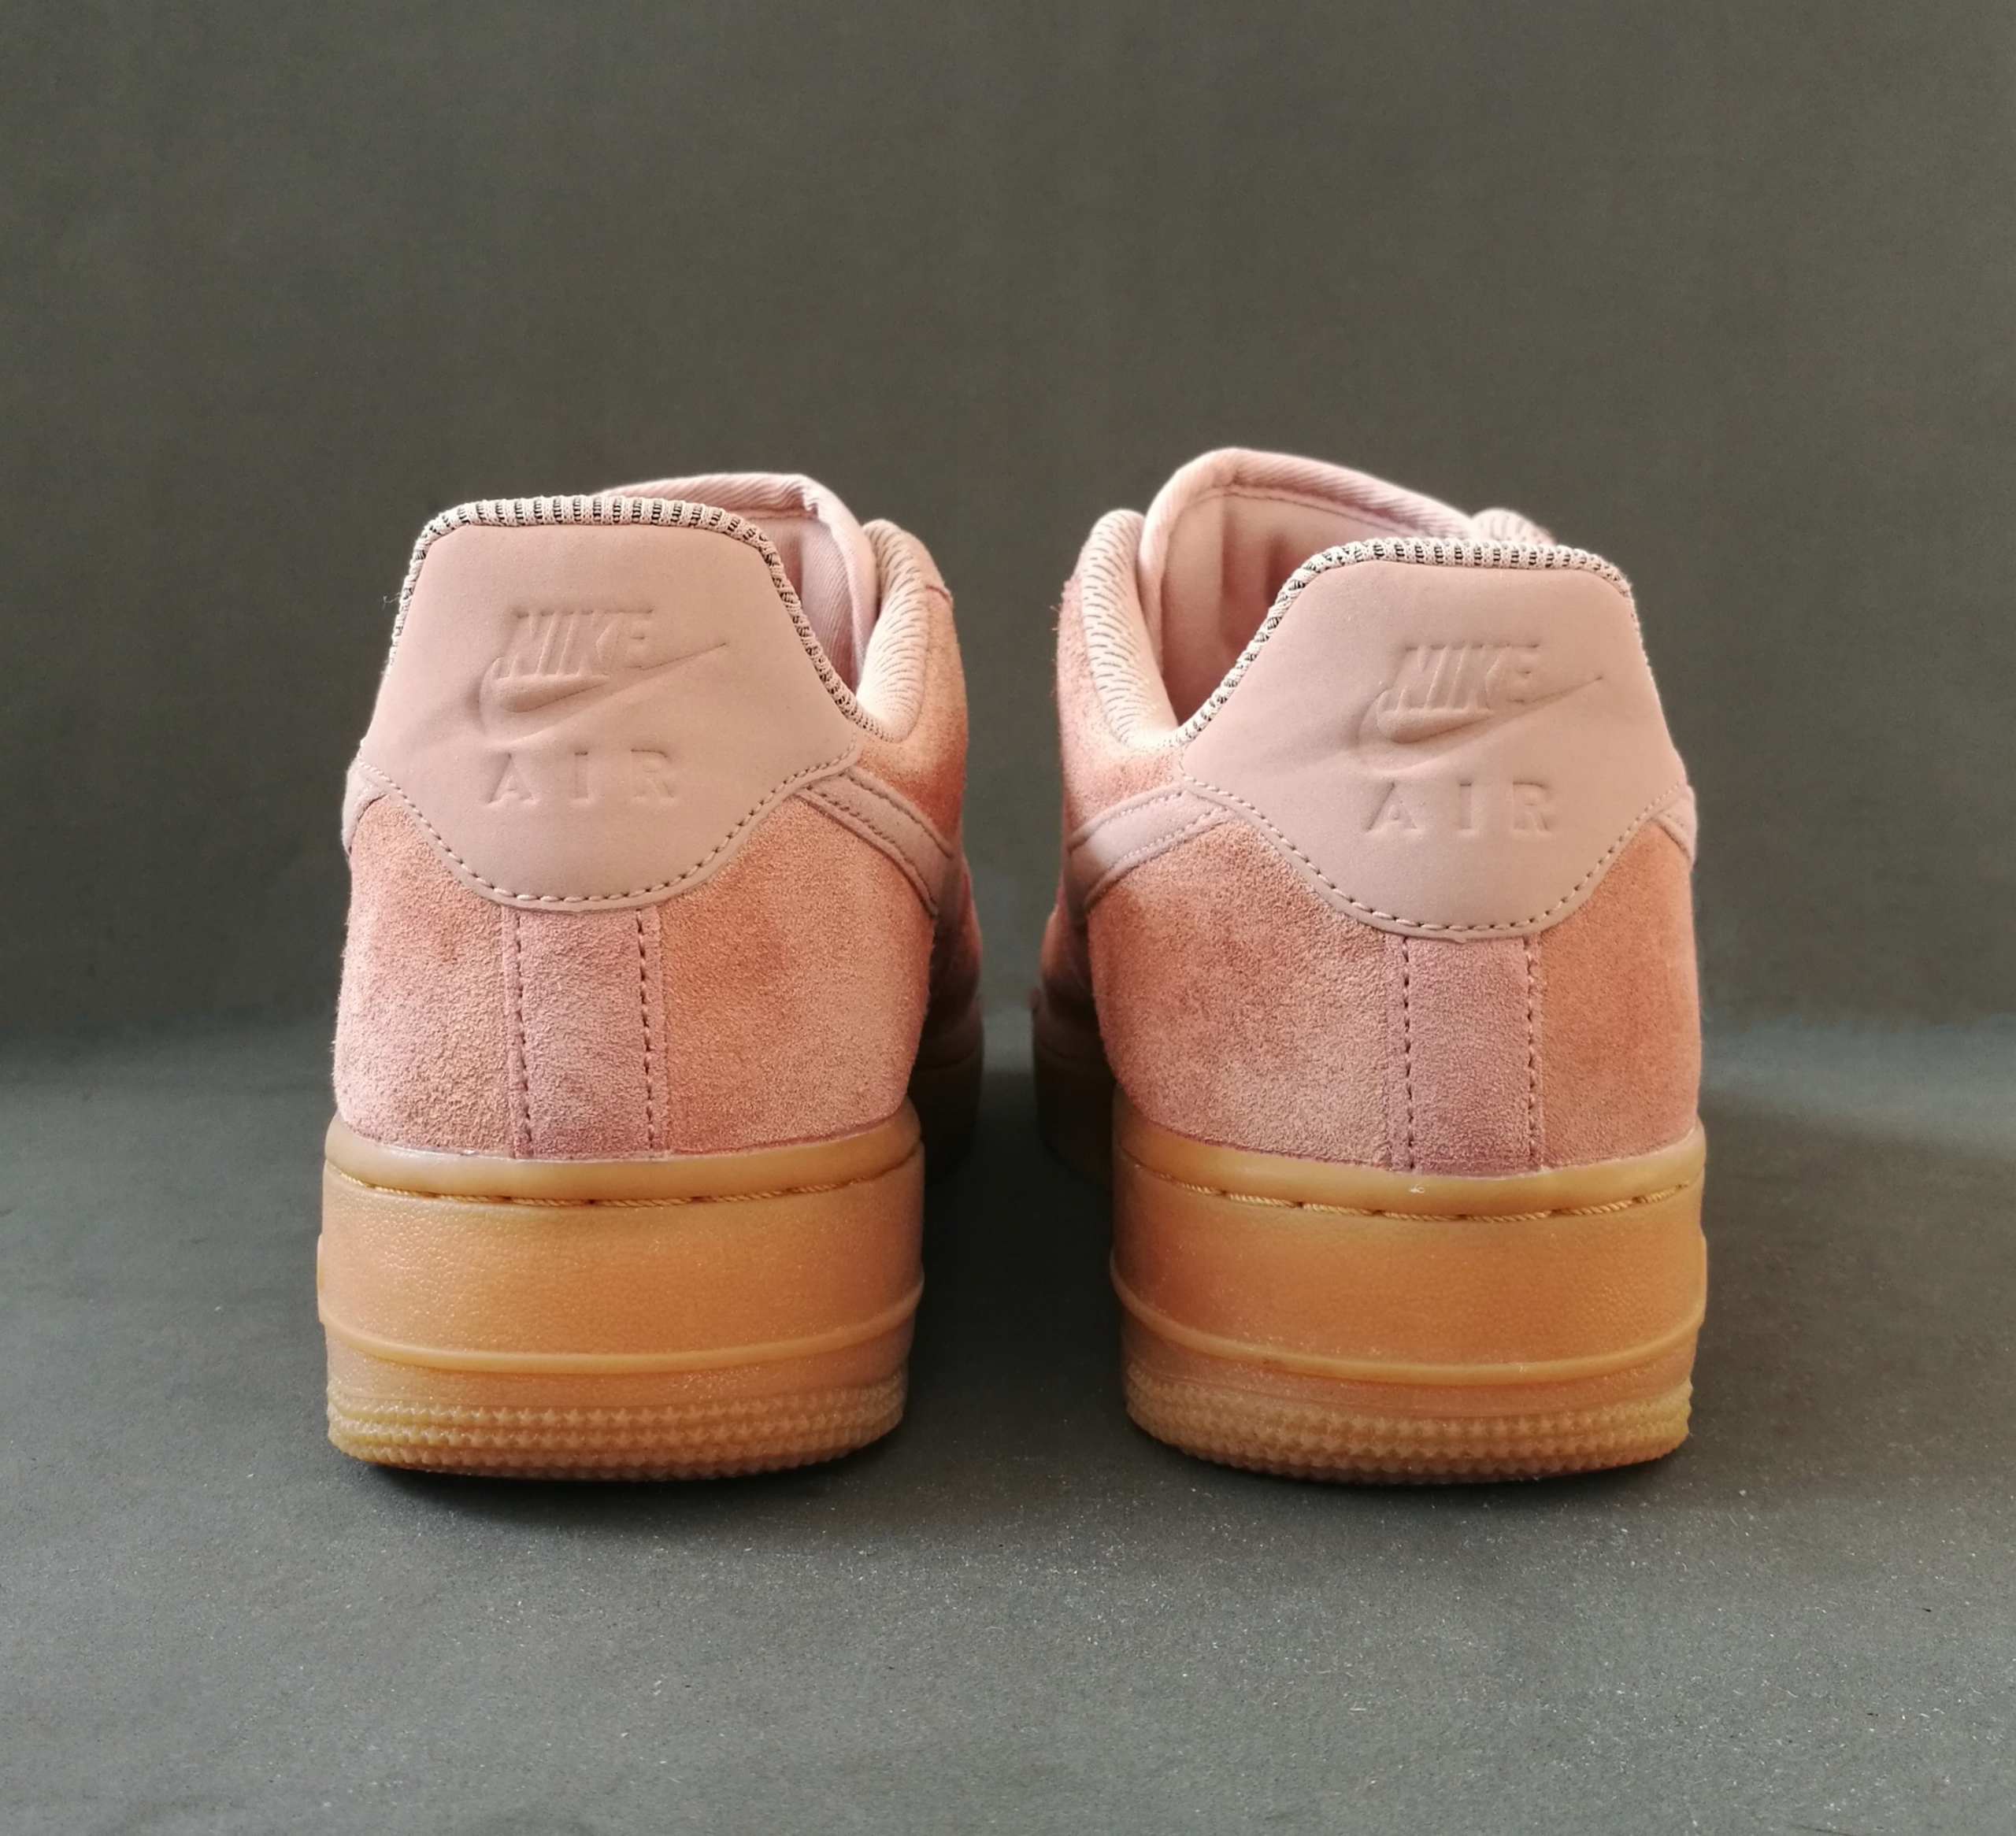 NIKE AIR FORCE 1 07 LV 8_AIR FORCE 1 07 LV 8/26cm/SUEDE US8